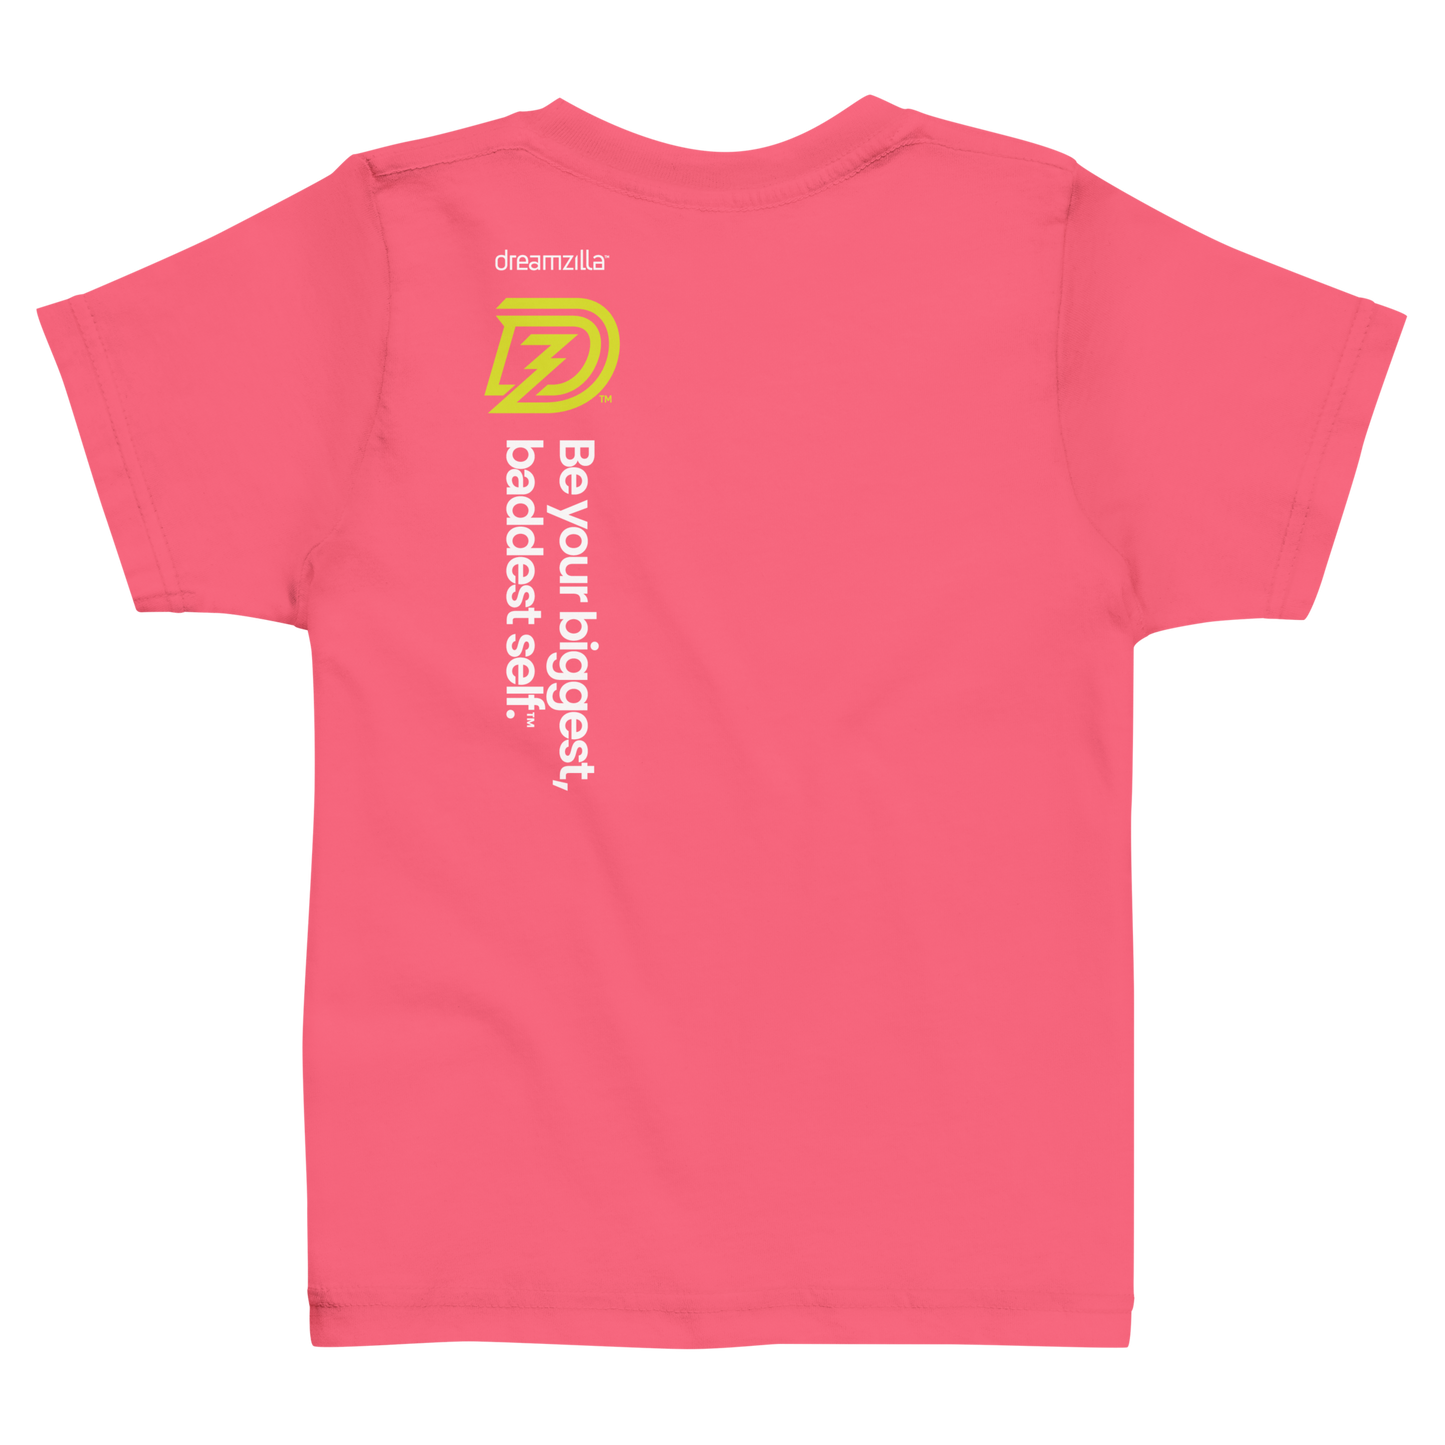 Back of Baby Zilla Toddler Short Sleeve Tee in Hot Pink